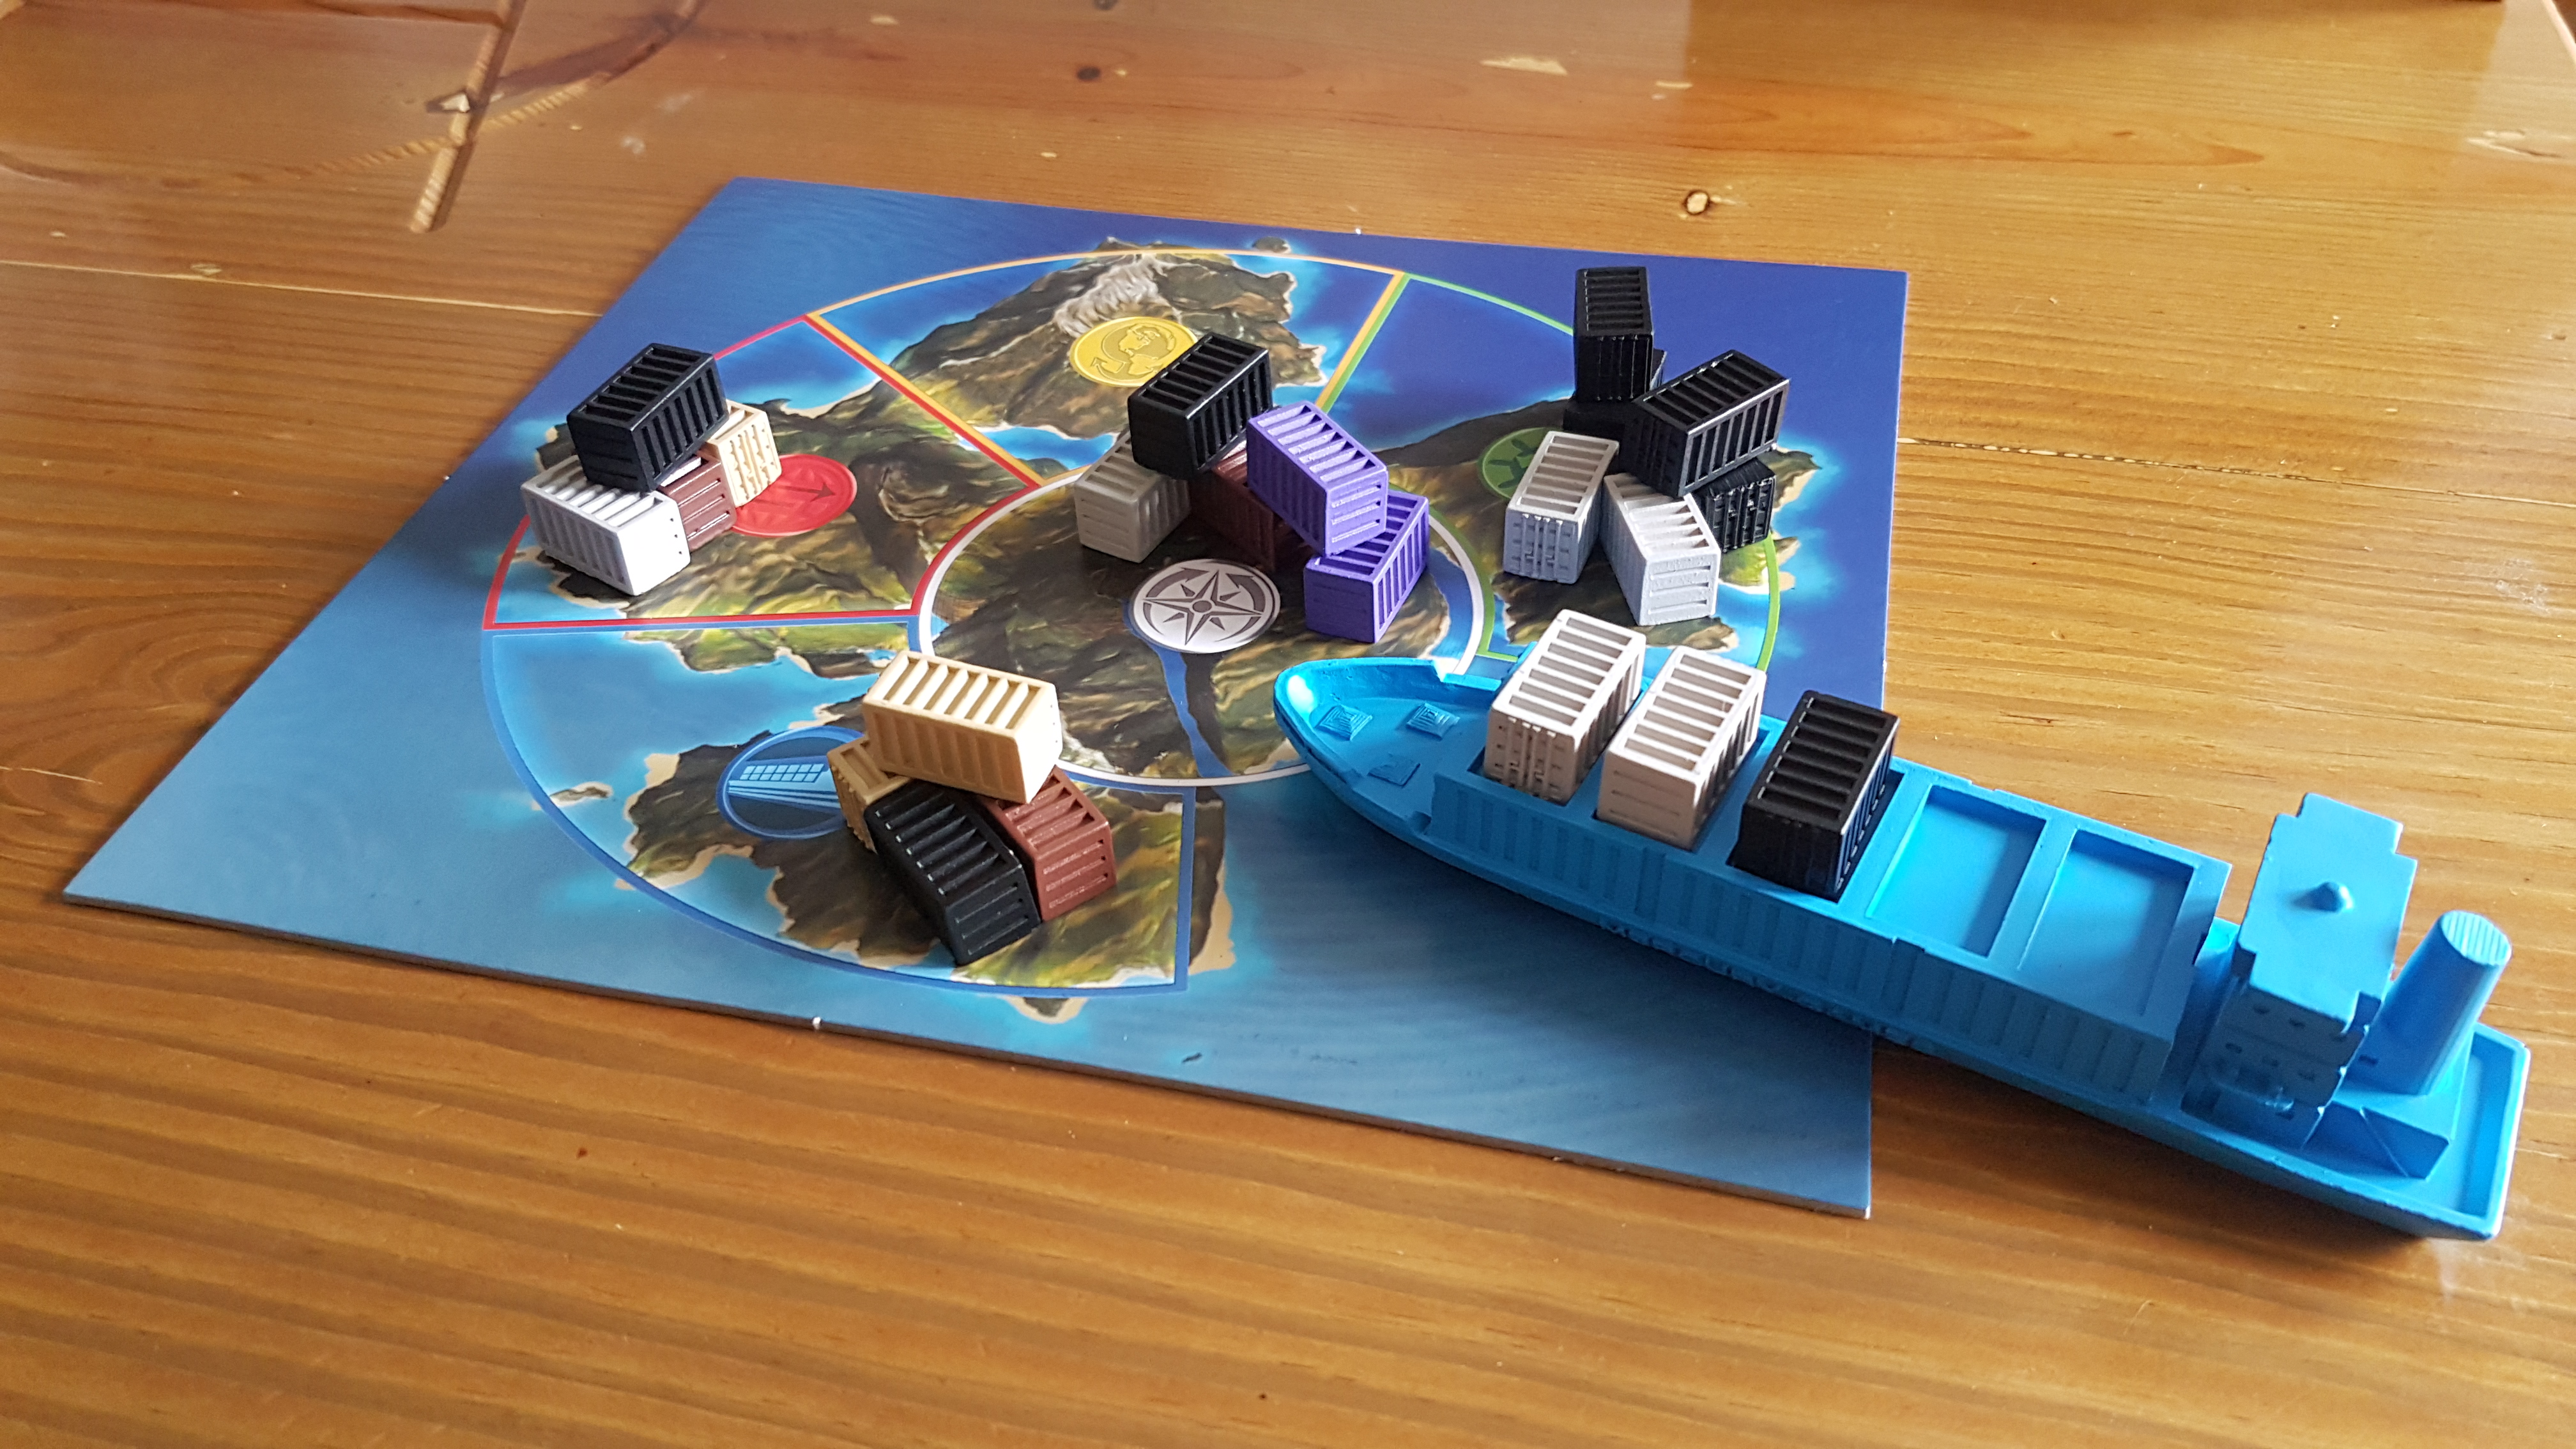 Container, Board Game